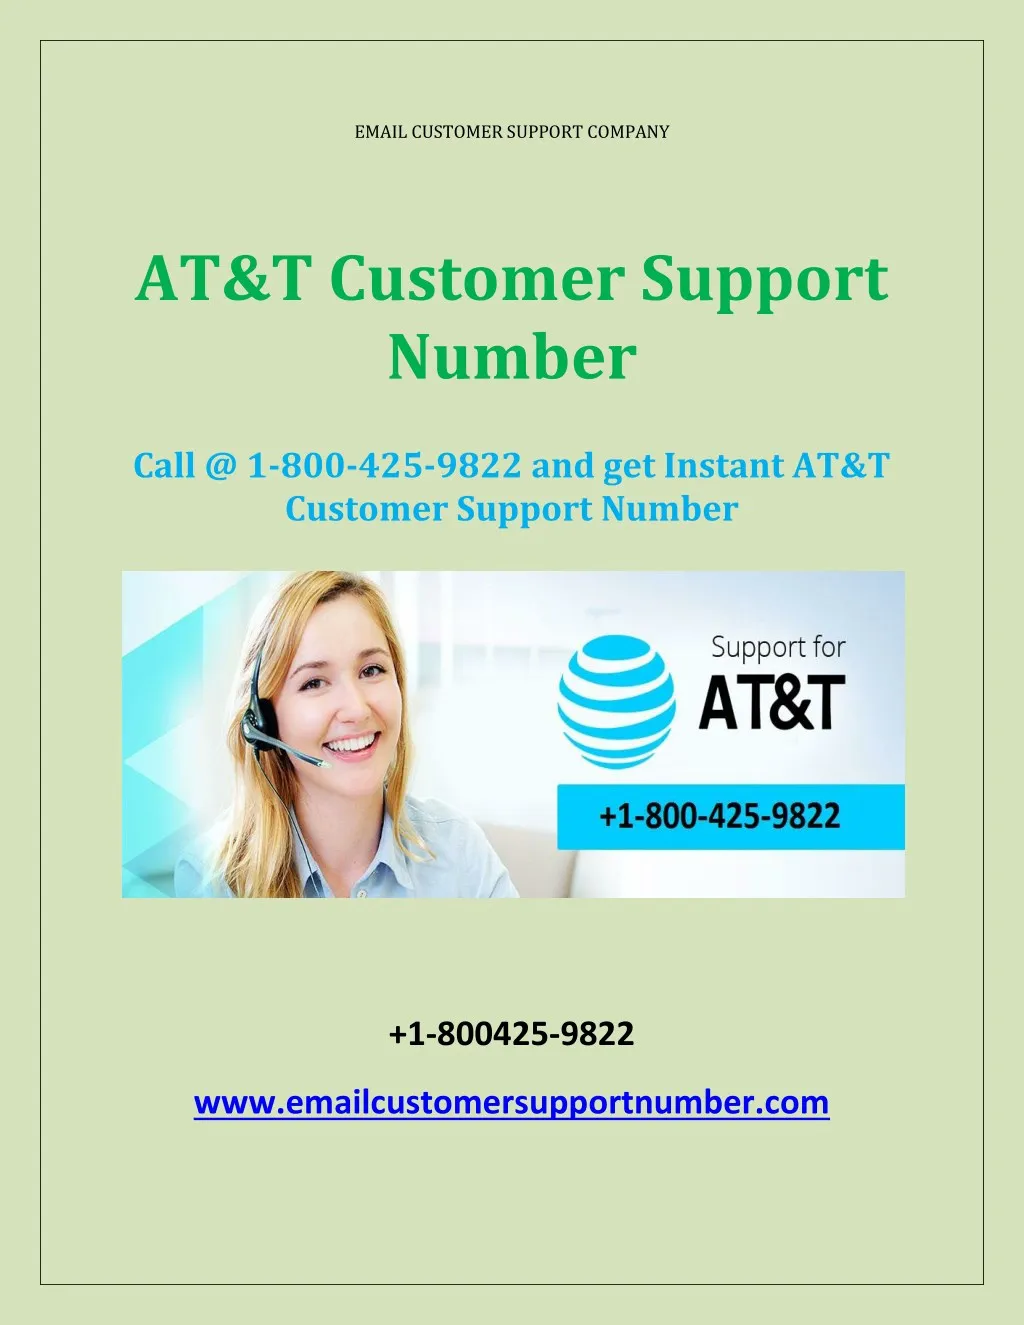 email customer support company